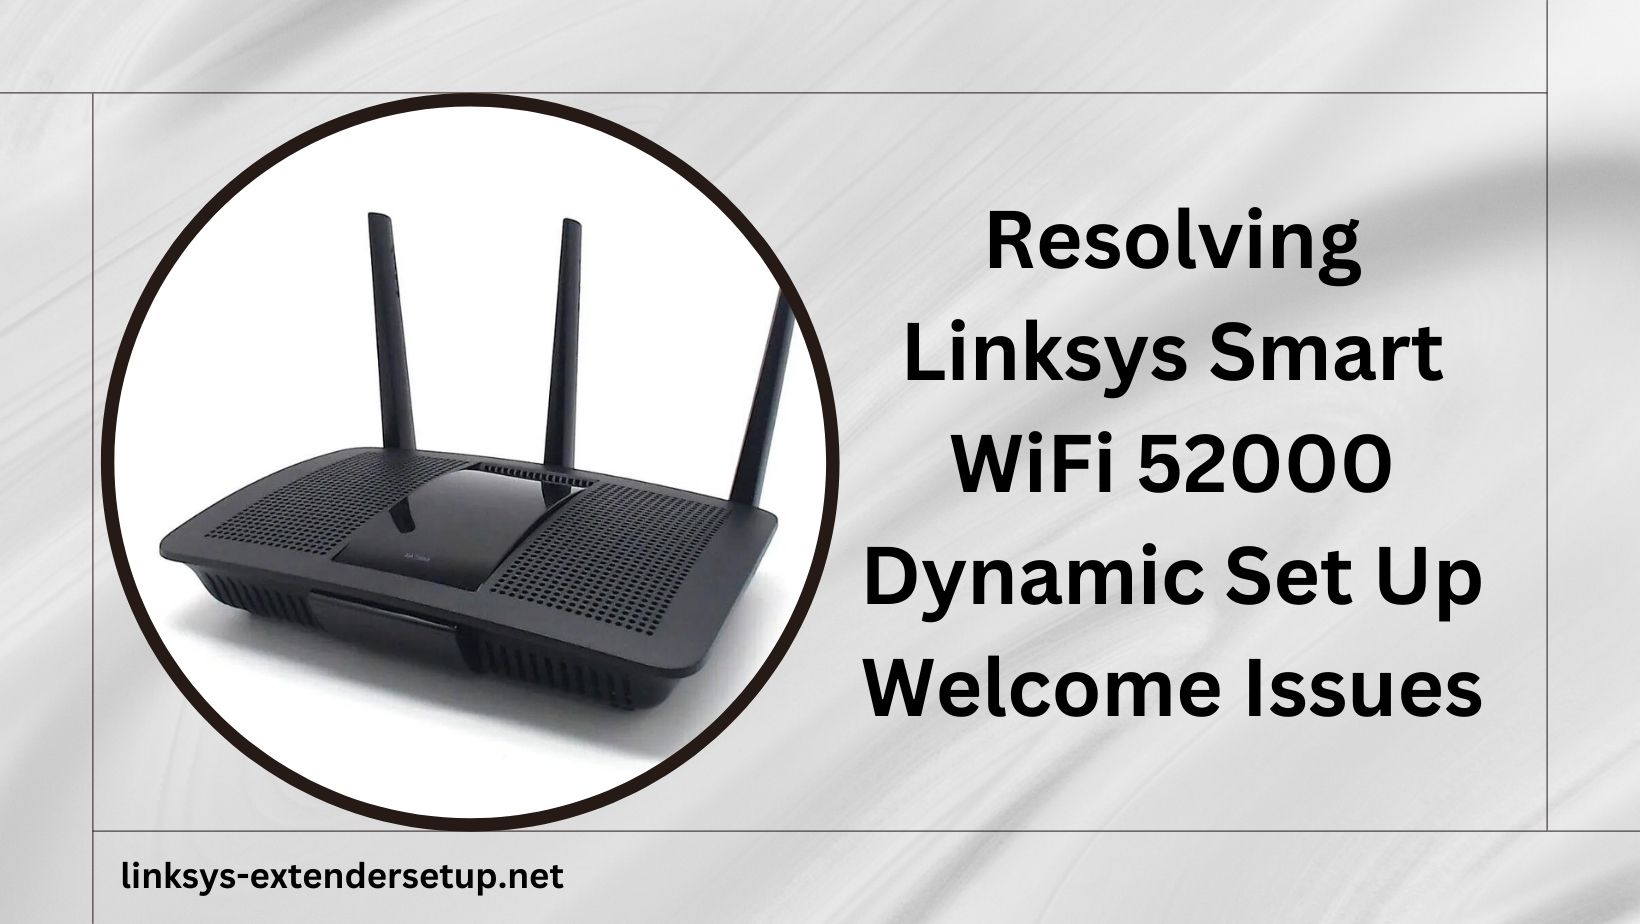 You are currently viewing Resolving Linksys Smart WiFi 52000 Dynamic Set Up Welcome Issues